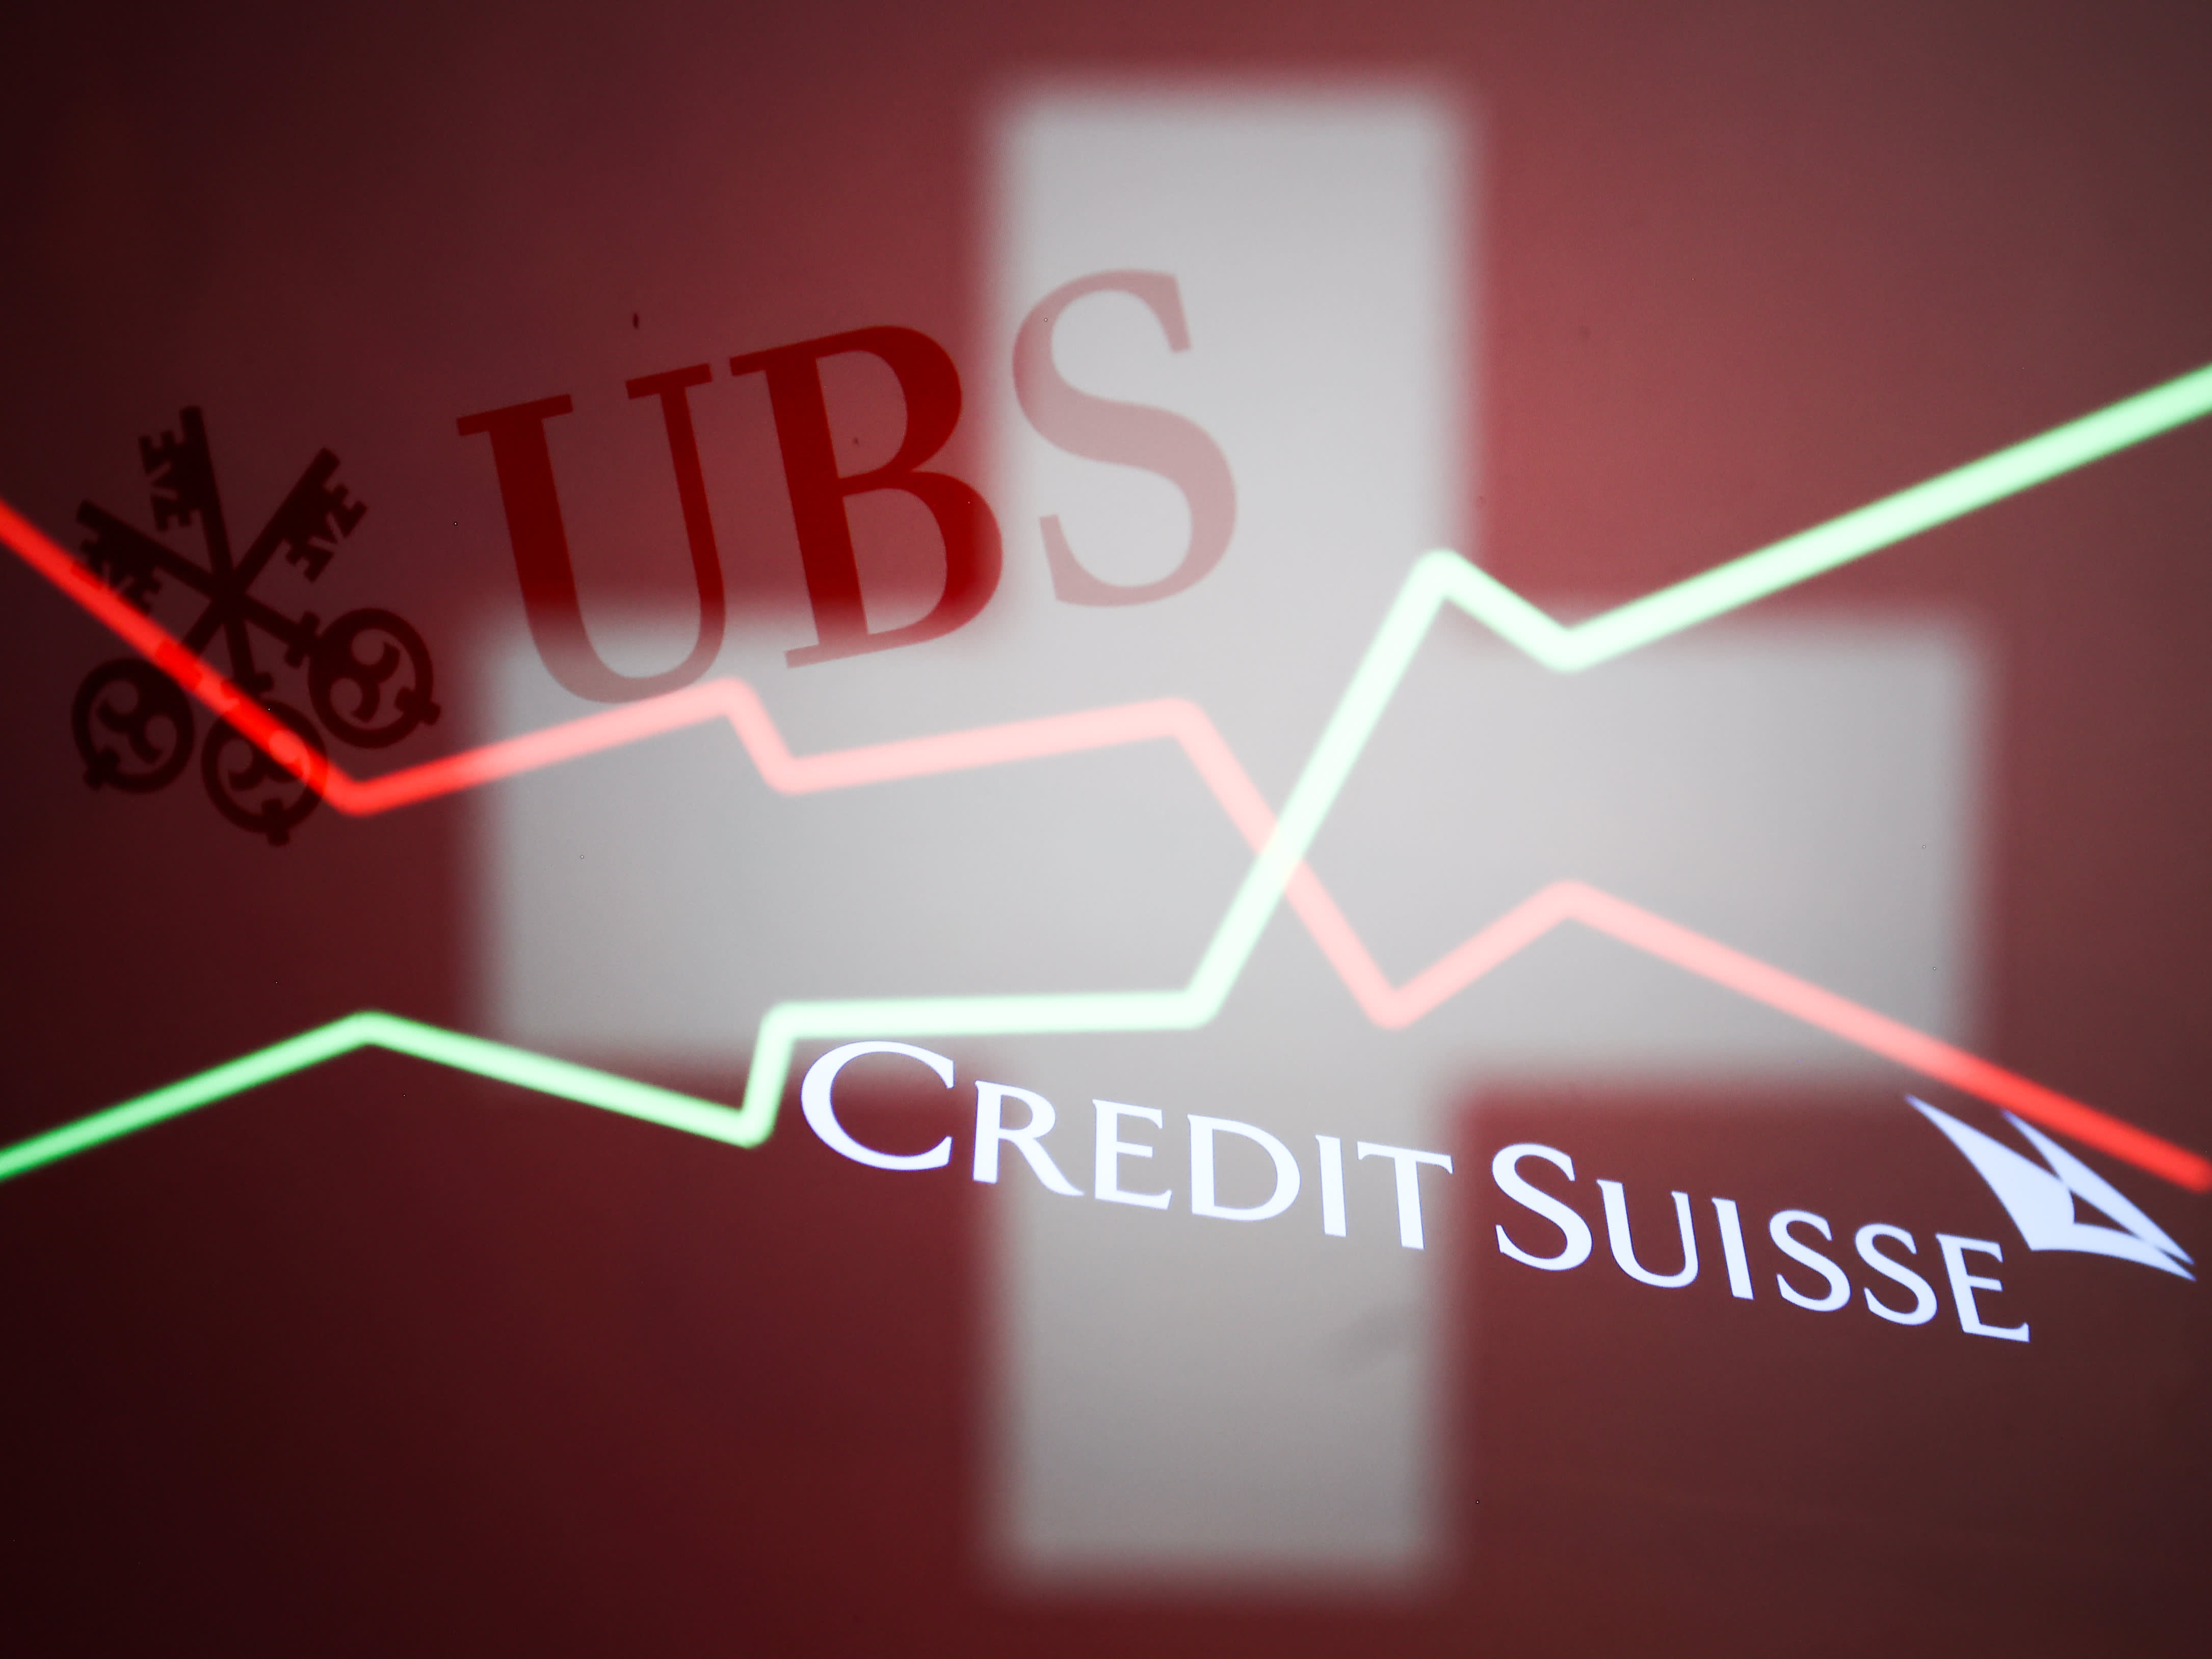 Asia regulators say banking system is stable after UBS-Credit Suisse deal